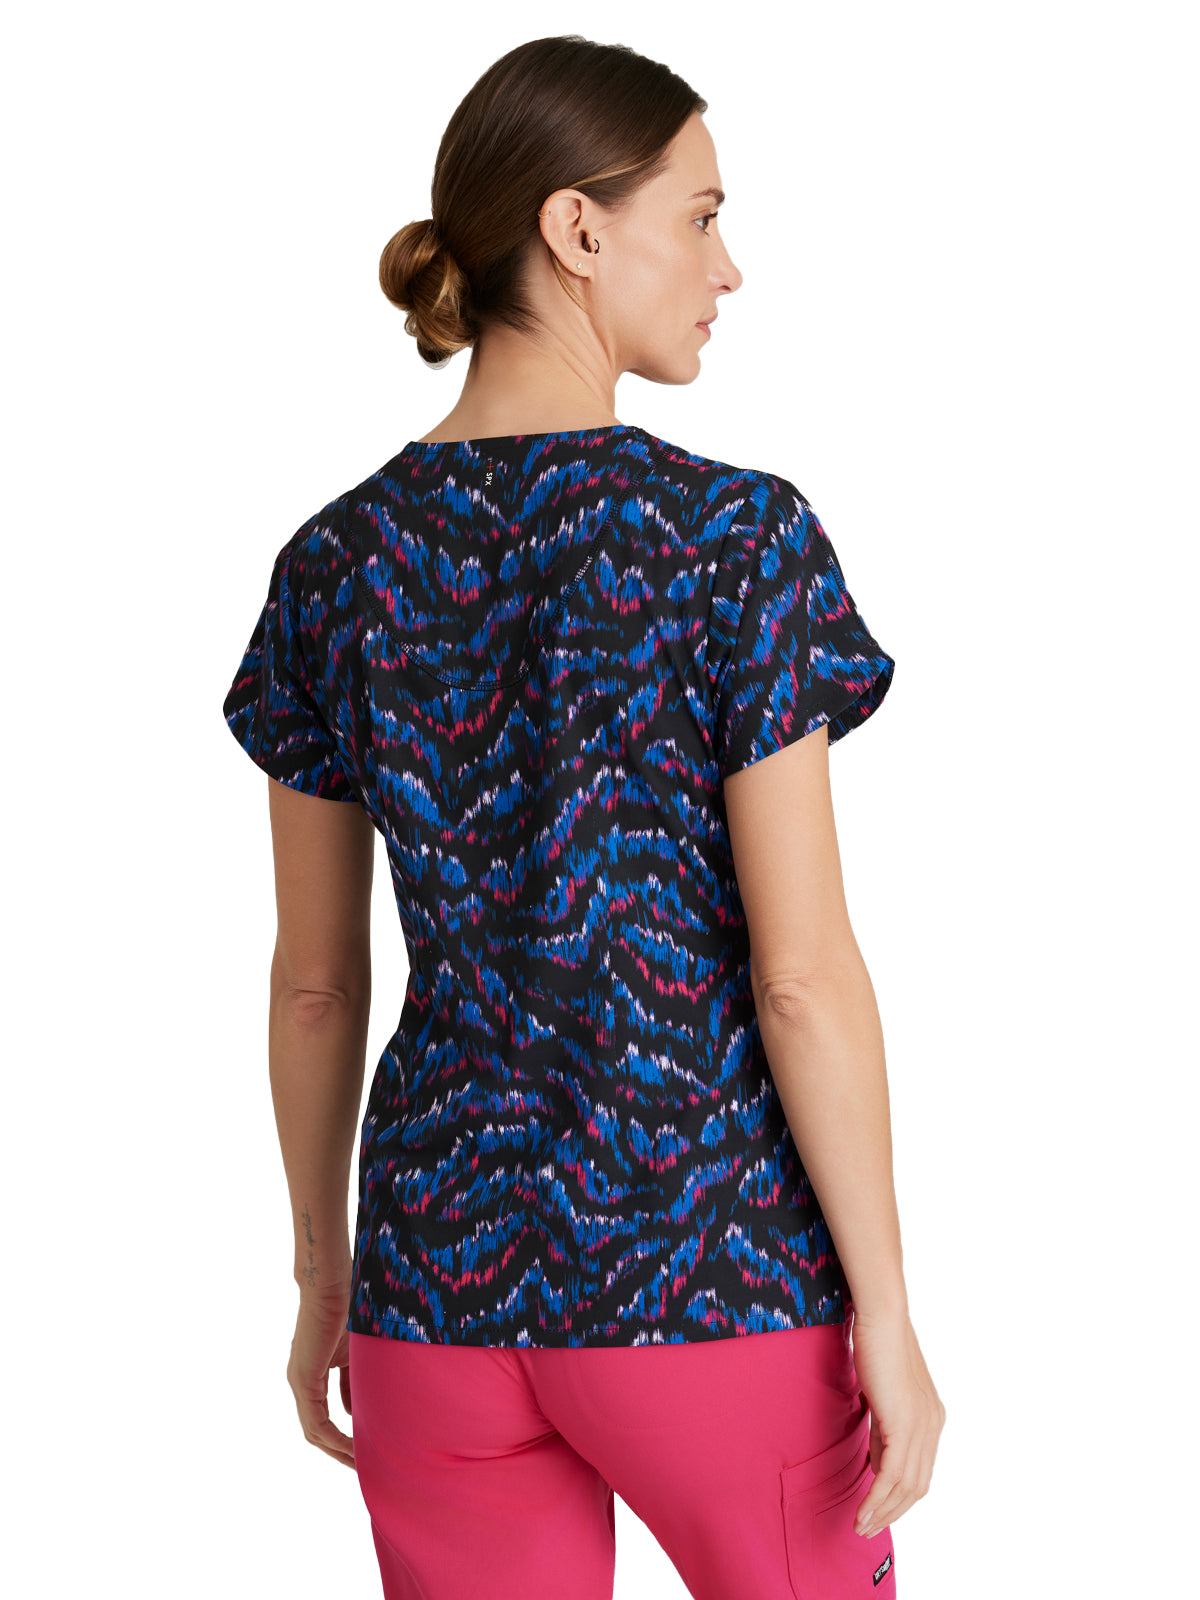 Arie Print Top - GRST207 - Animal Scents